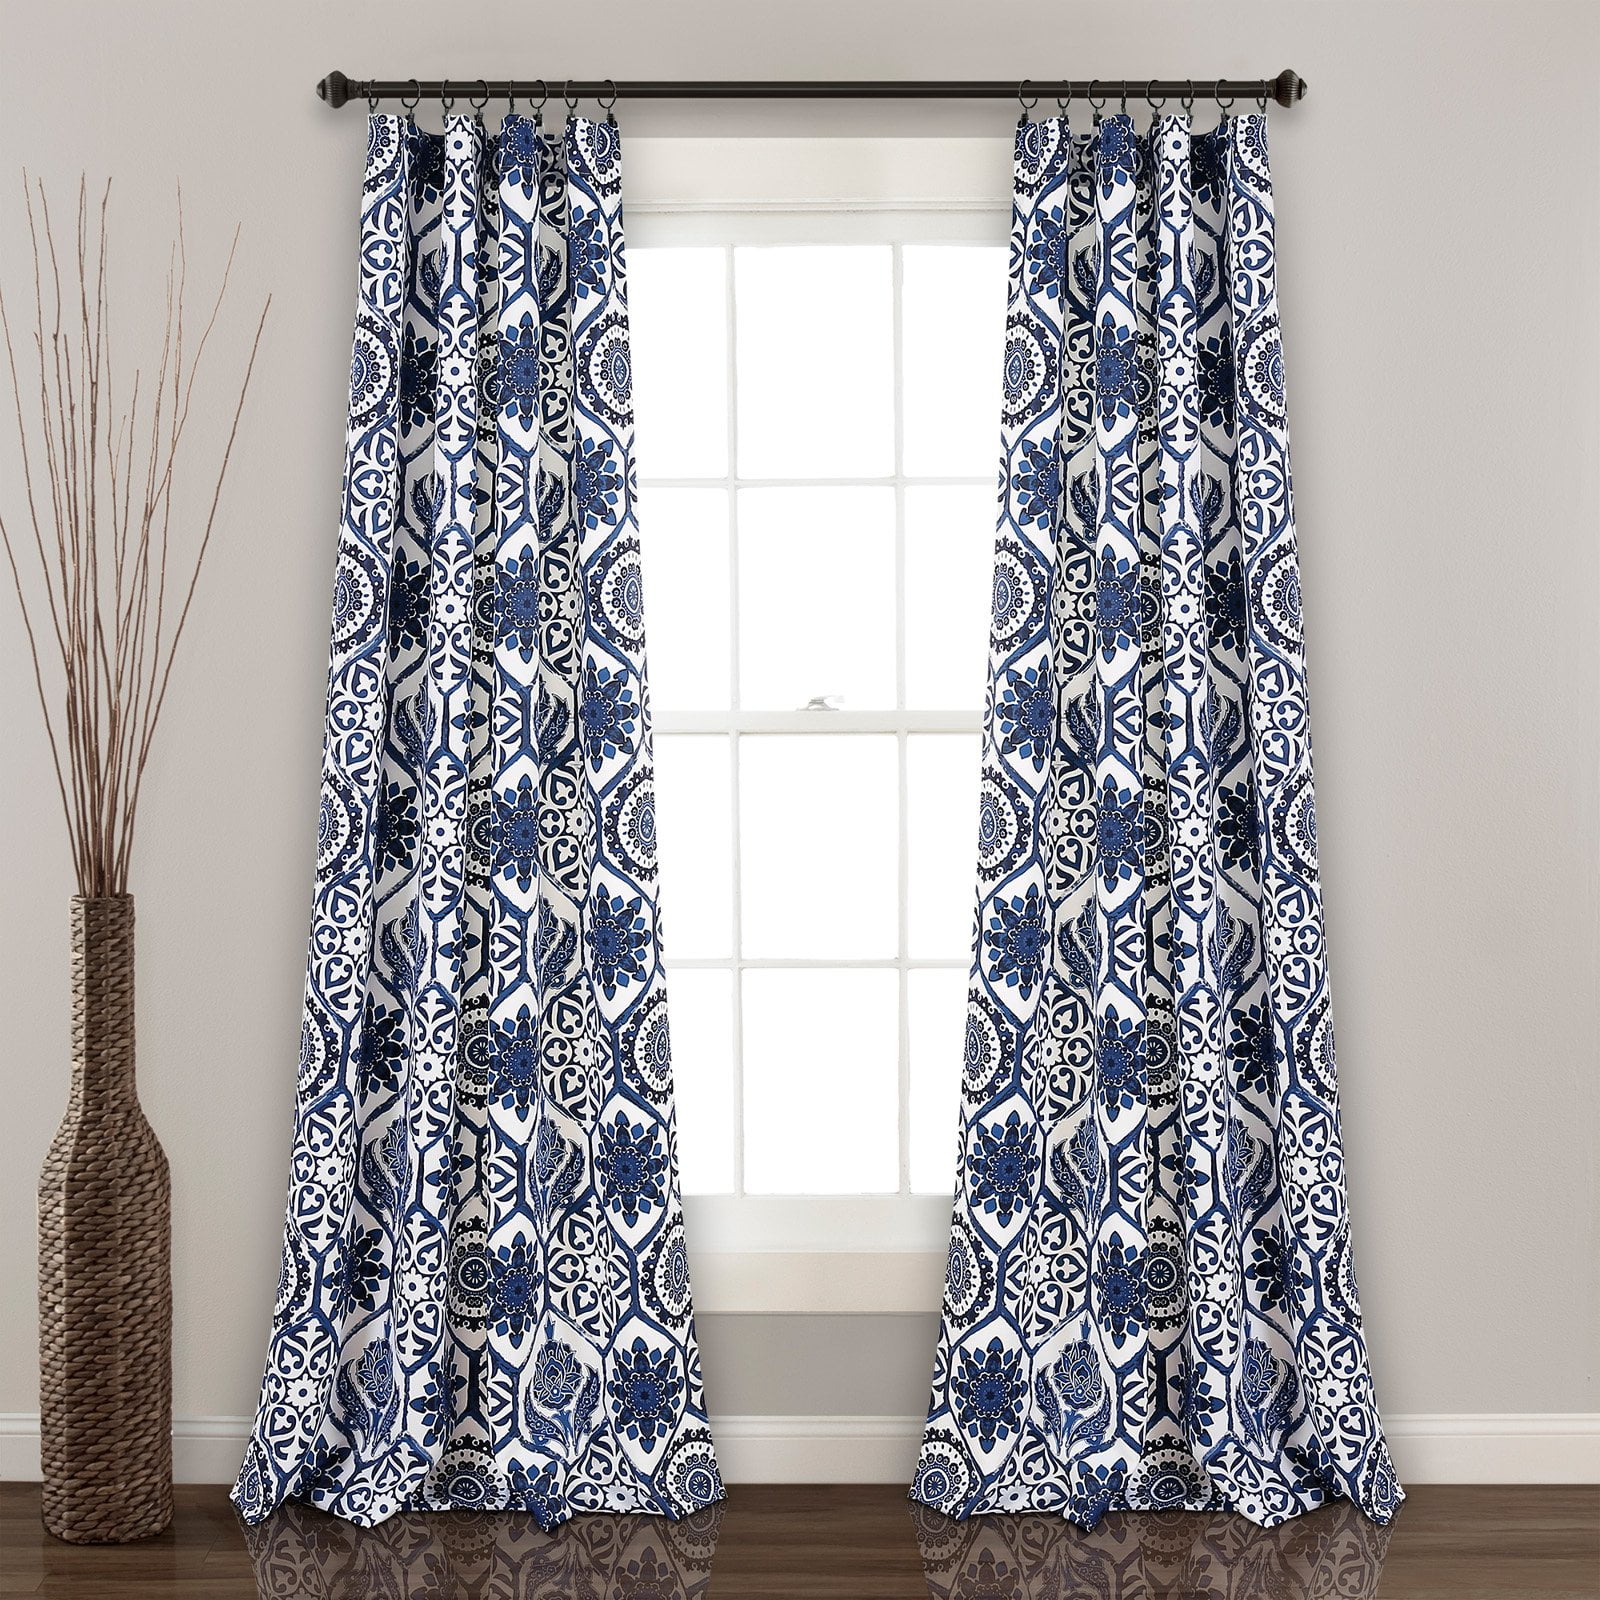 50 Inches by 84 Inches ENVOGUE 2pc Window Curtain Set Floating Medallions Shades of Blue on White Top Border Window Panels